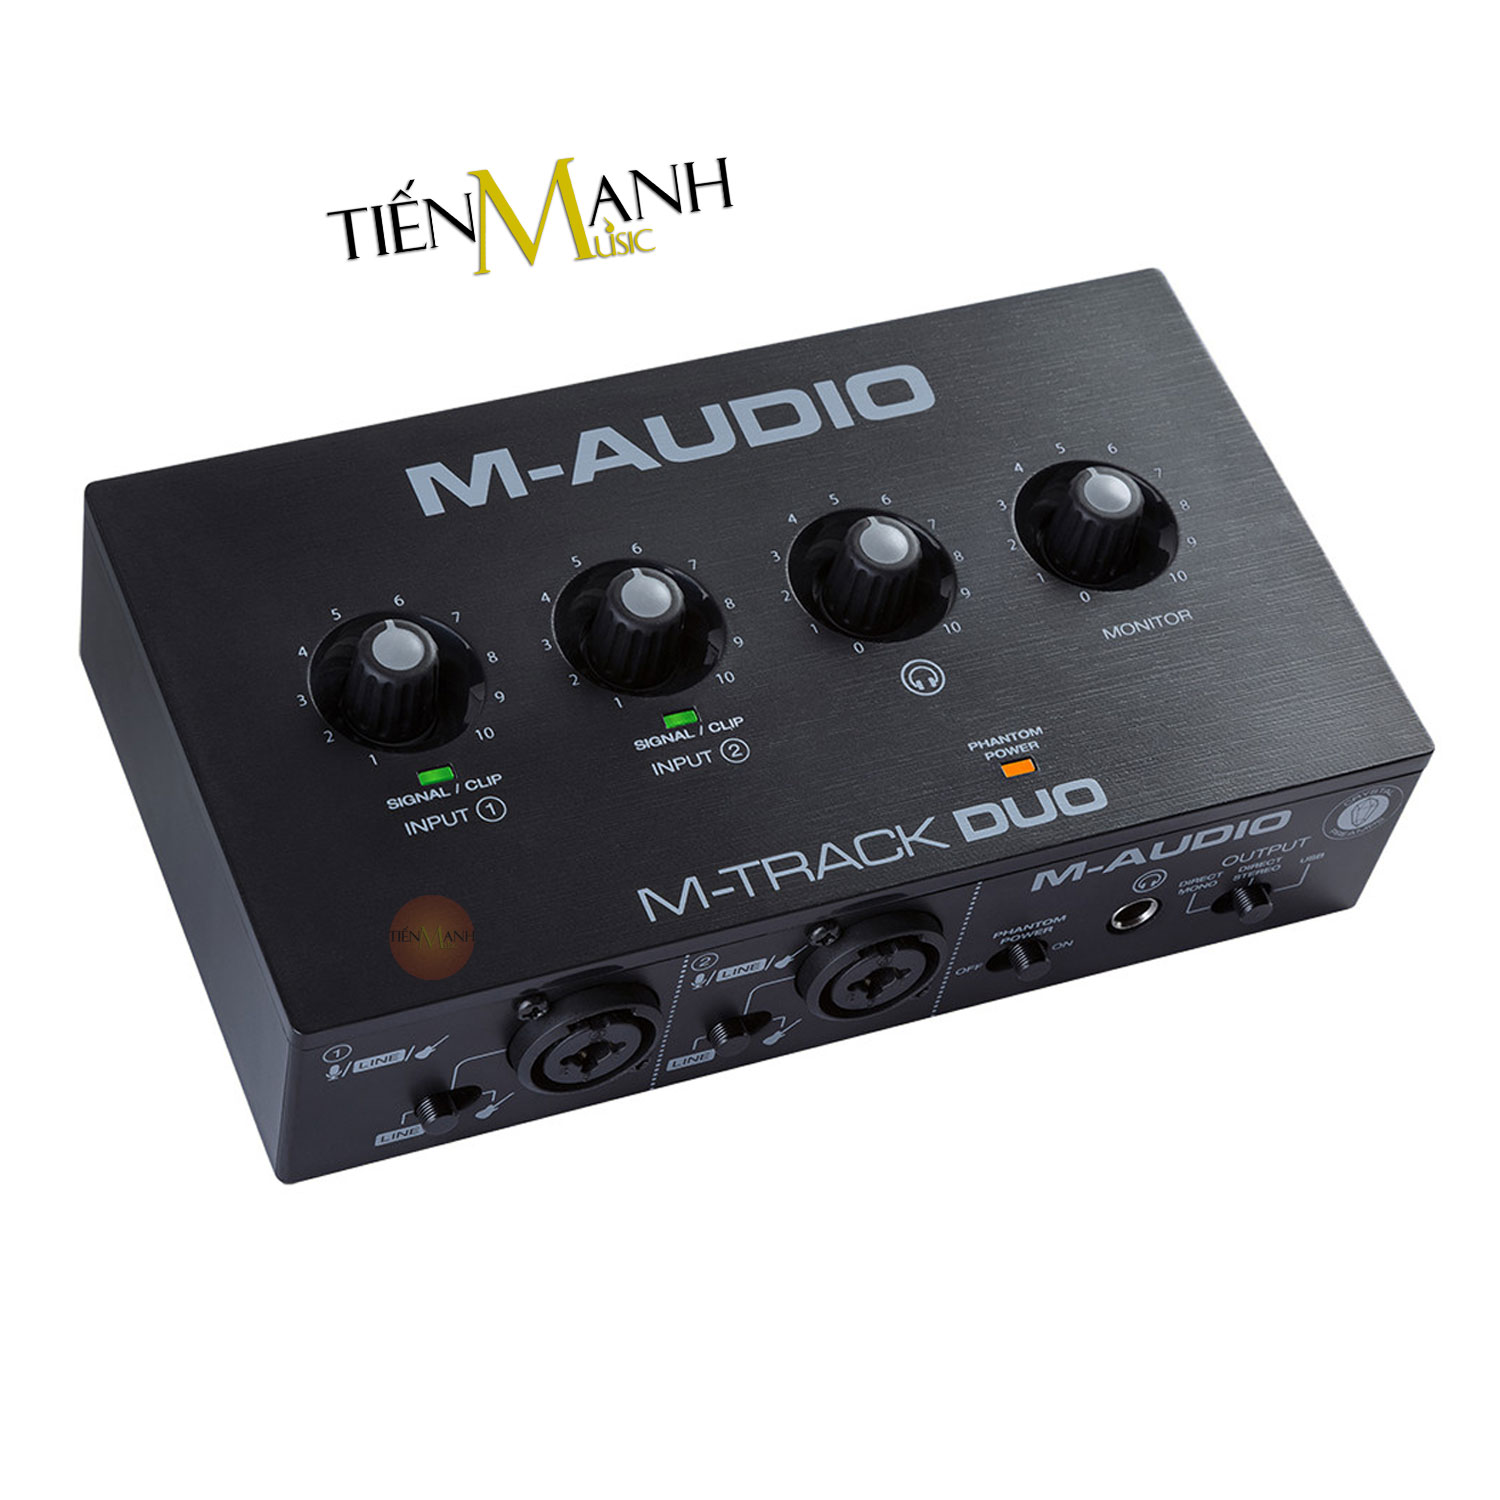 Chinh-Hang-Soundcard-M-Audio-Mtrack-Duo.jpg